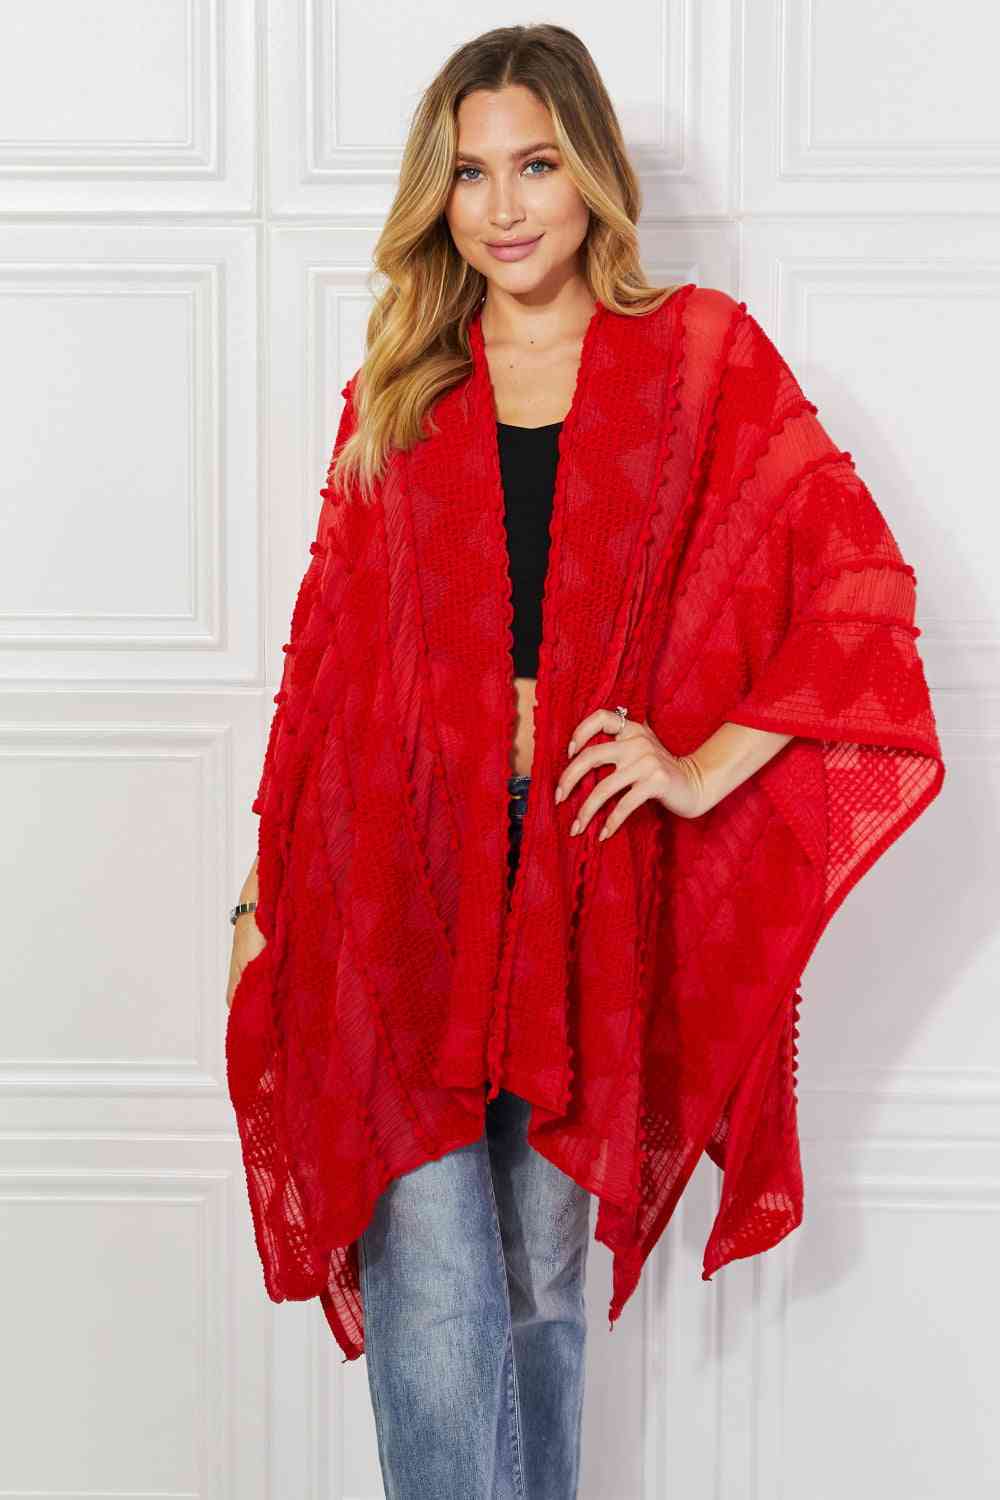 Pom-Pom Asymmetrical Poncho Cardigan in Red - Red / One Size - Women’s Clothing & Accessories - Outerwear - 7 - 2024